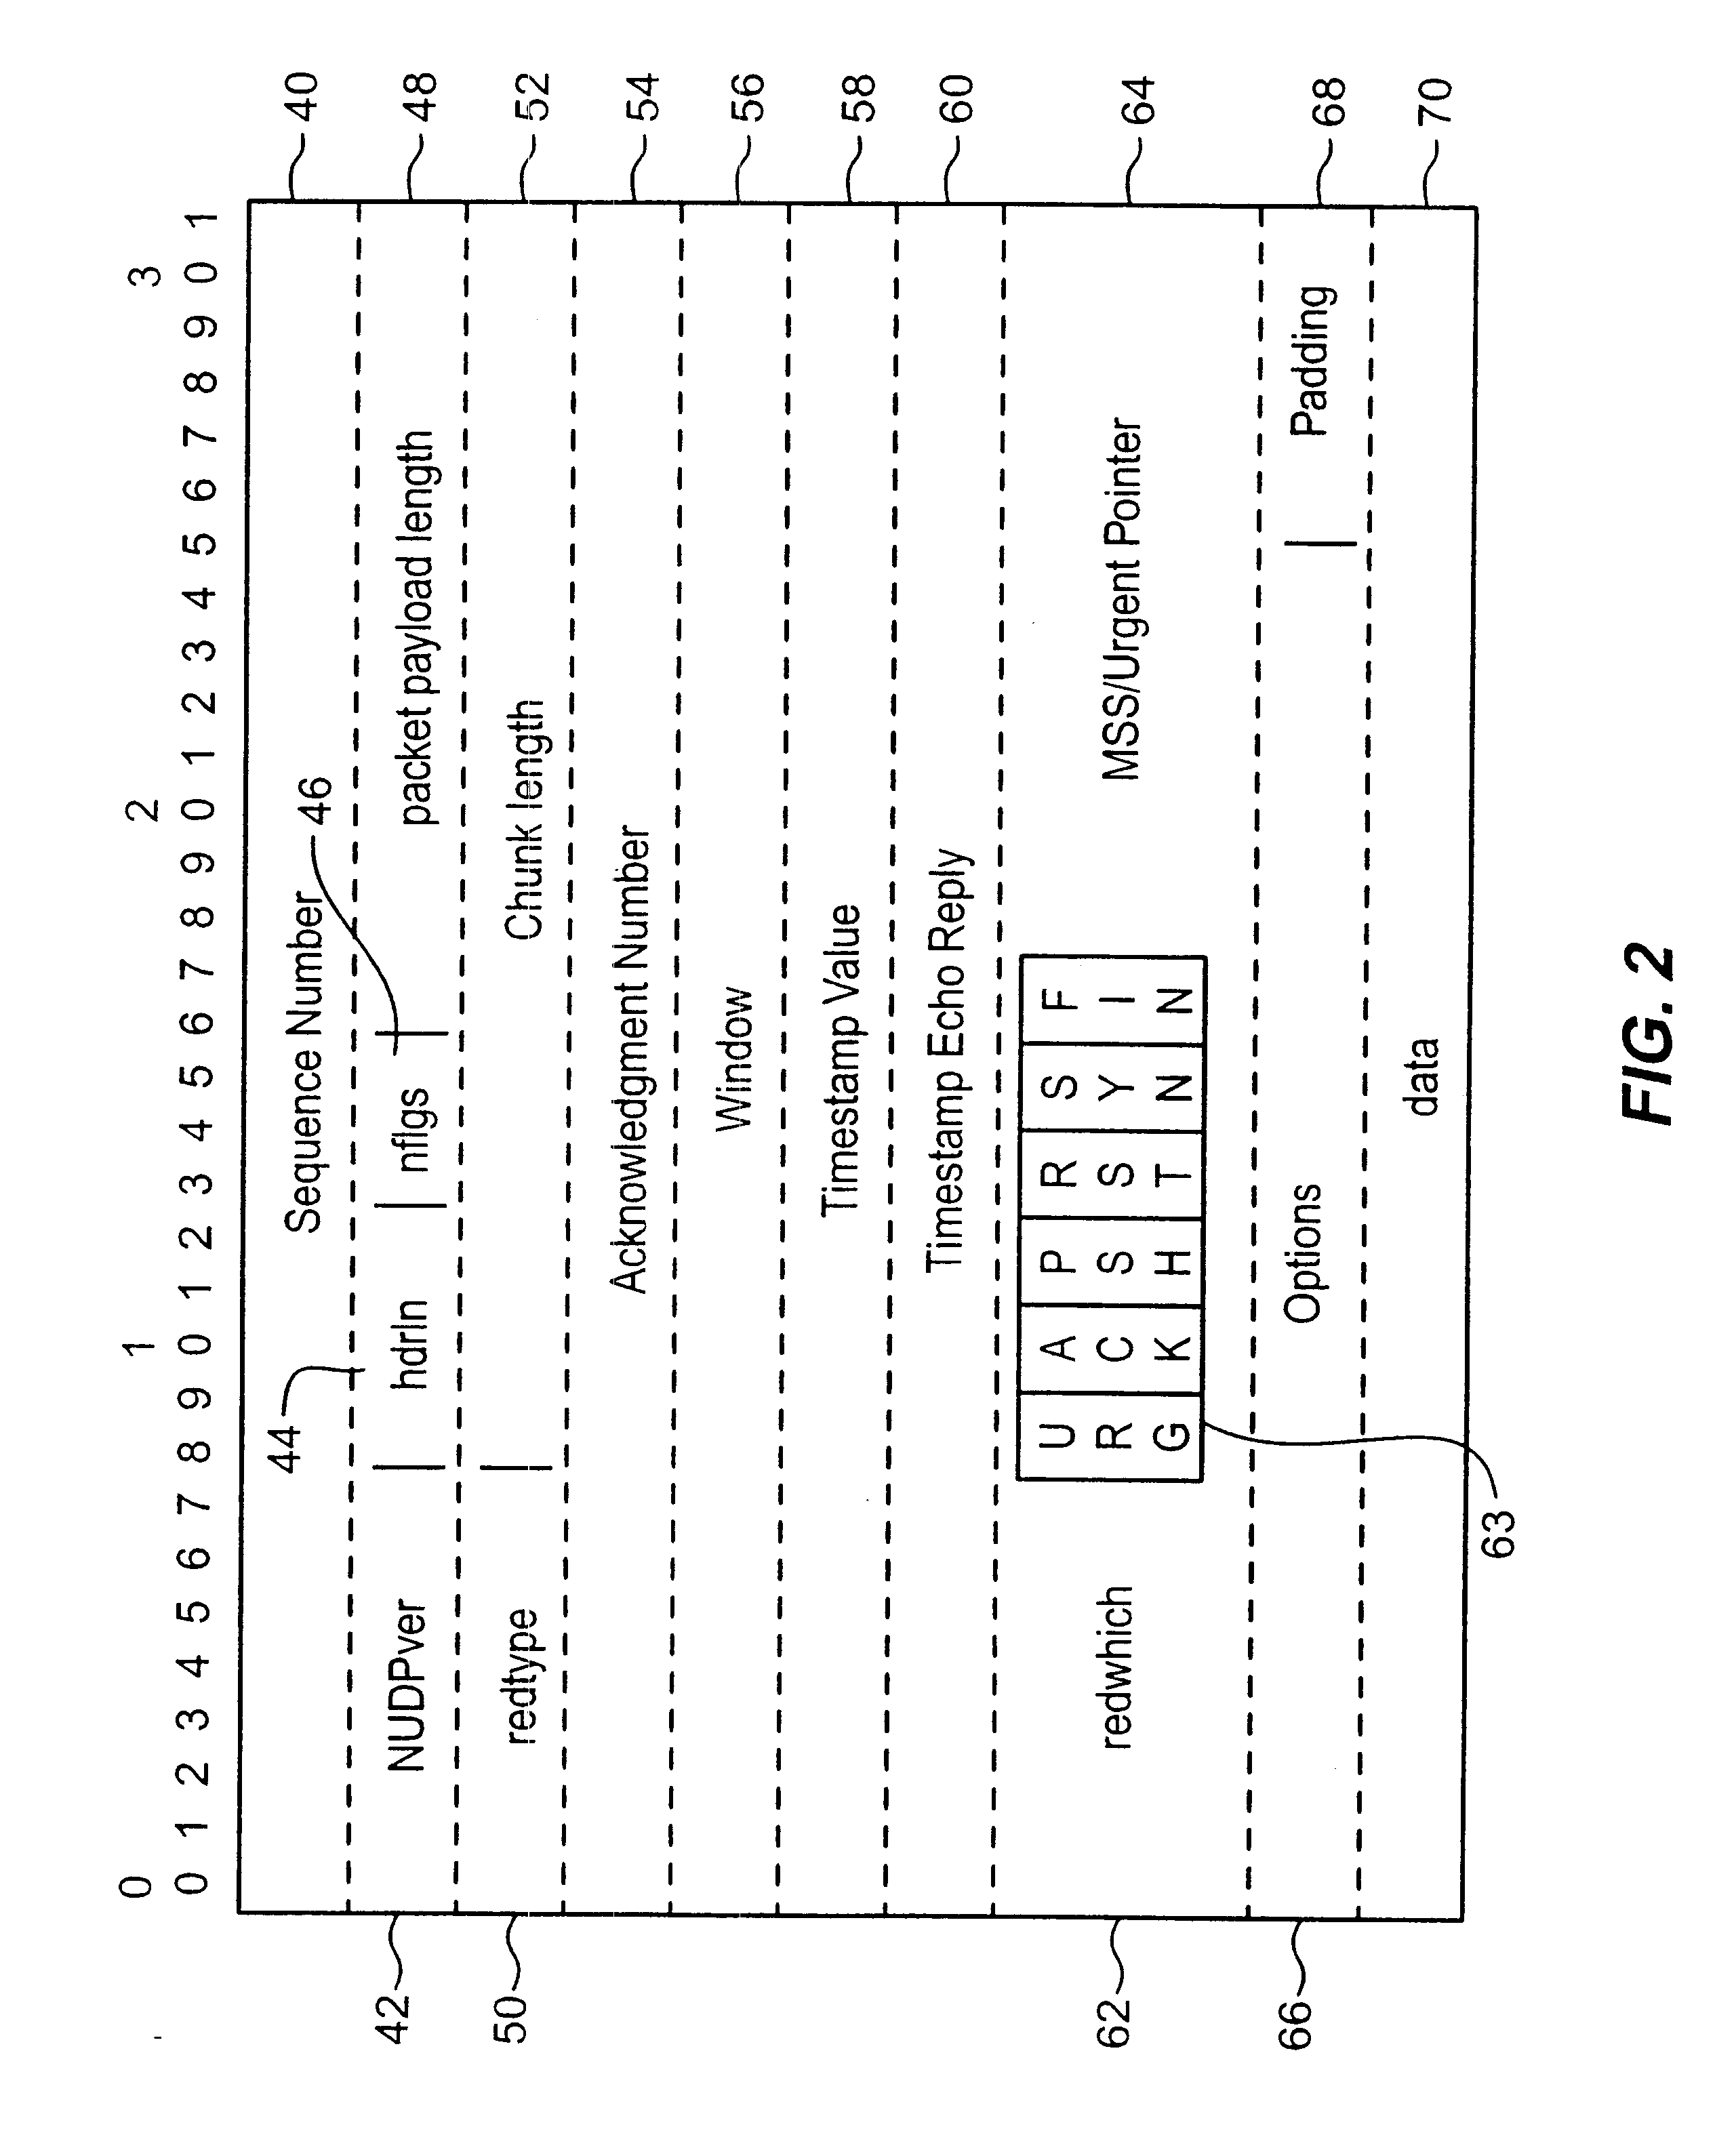 System for recovering lost information in a data stream by means of parity packets